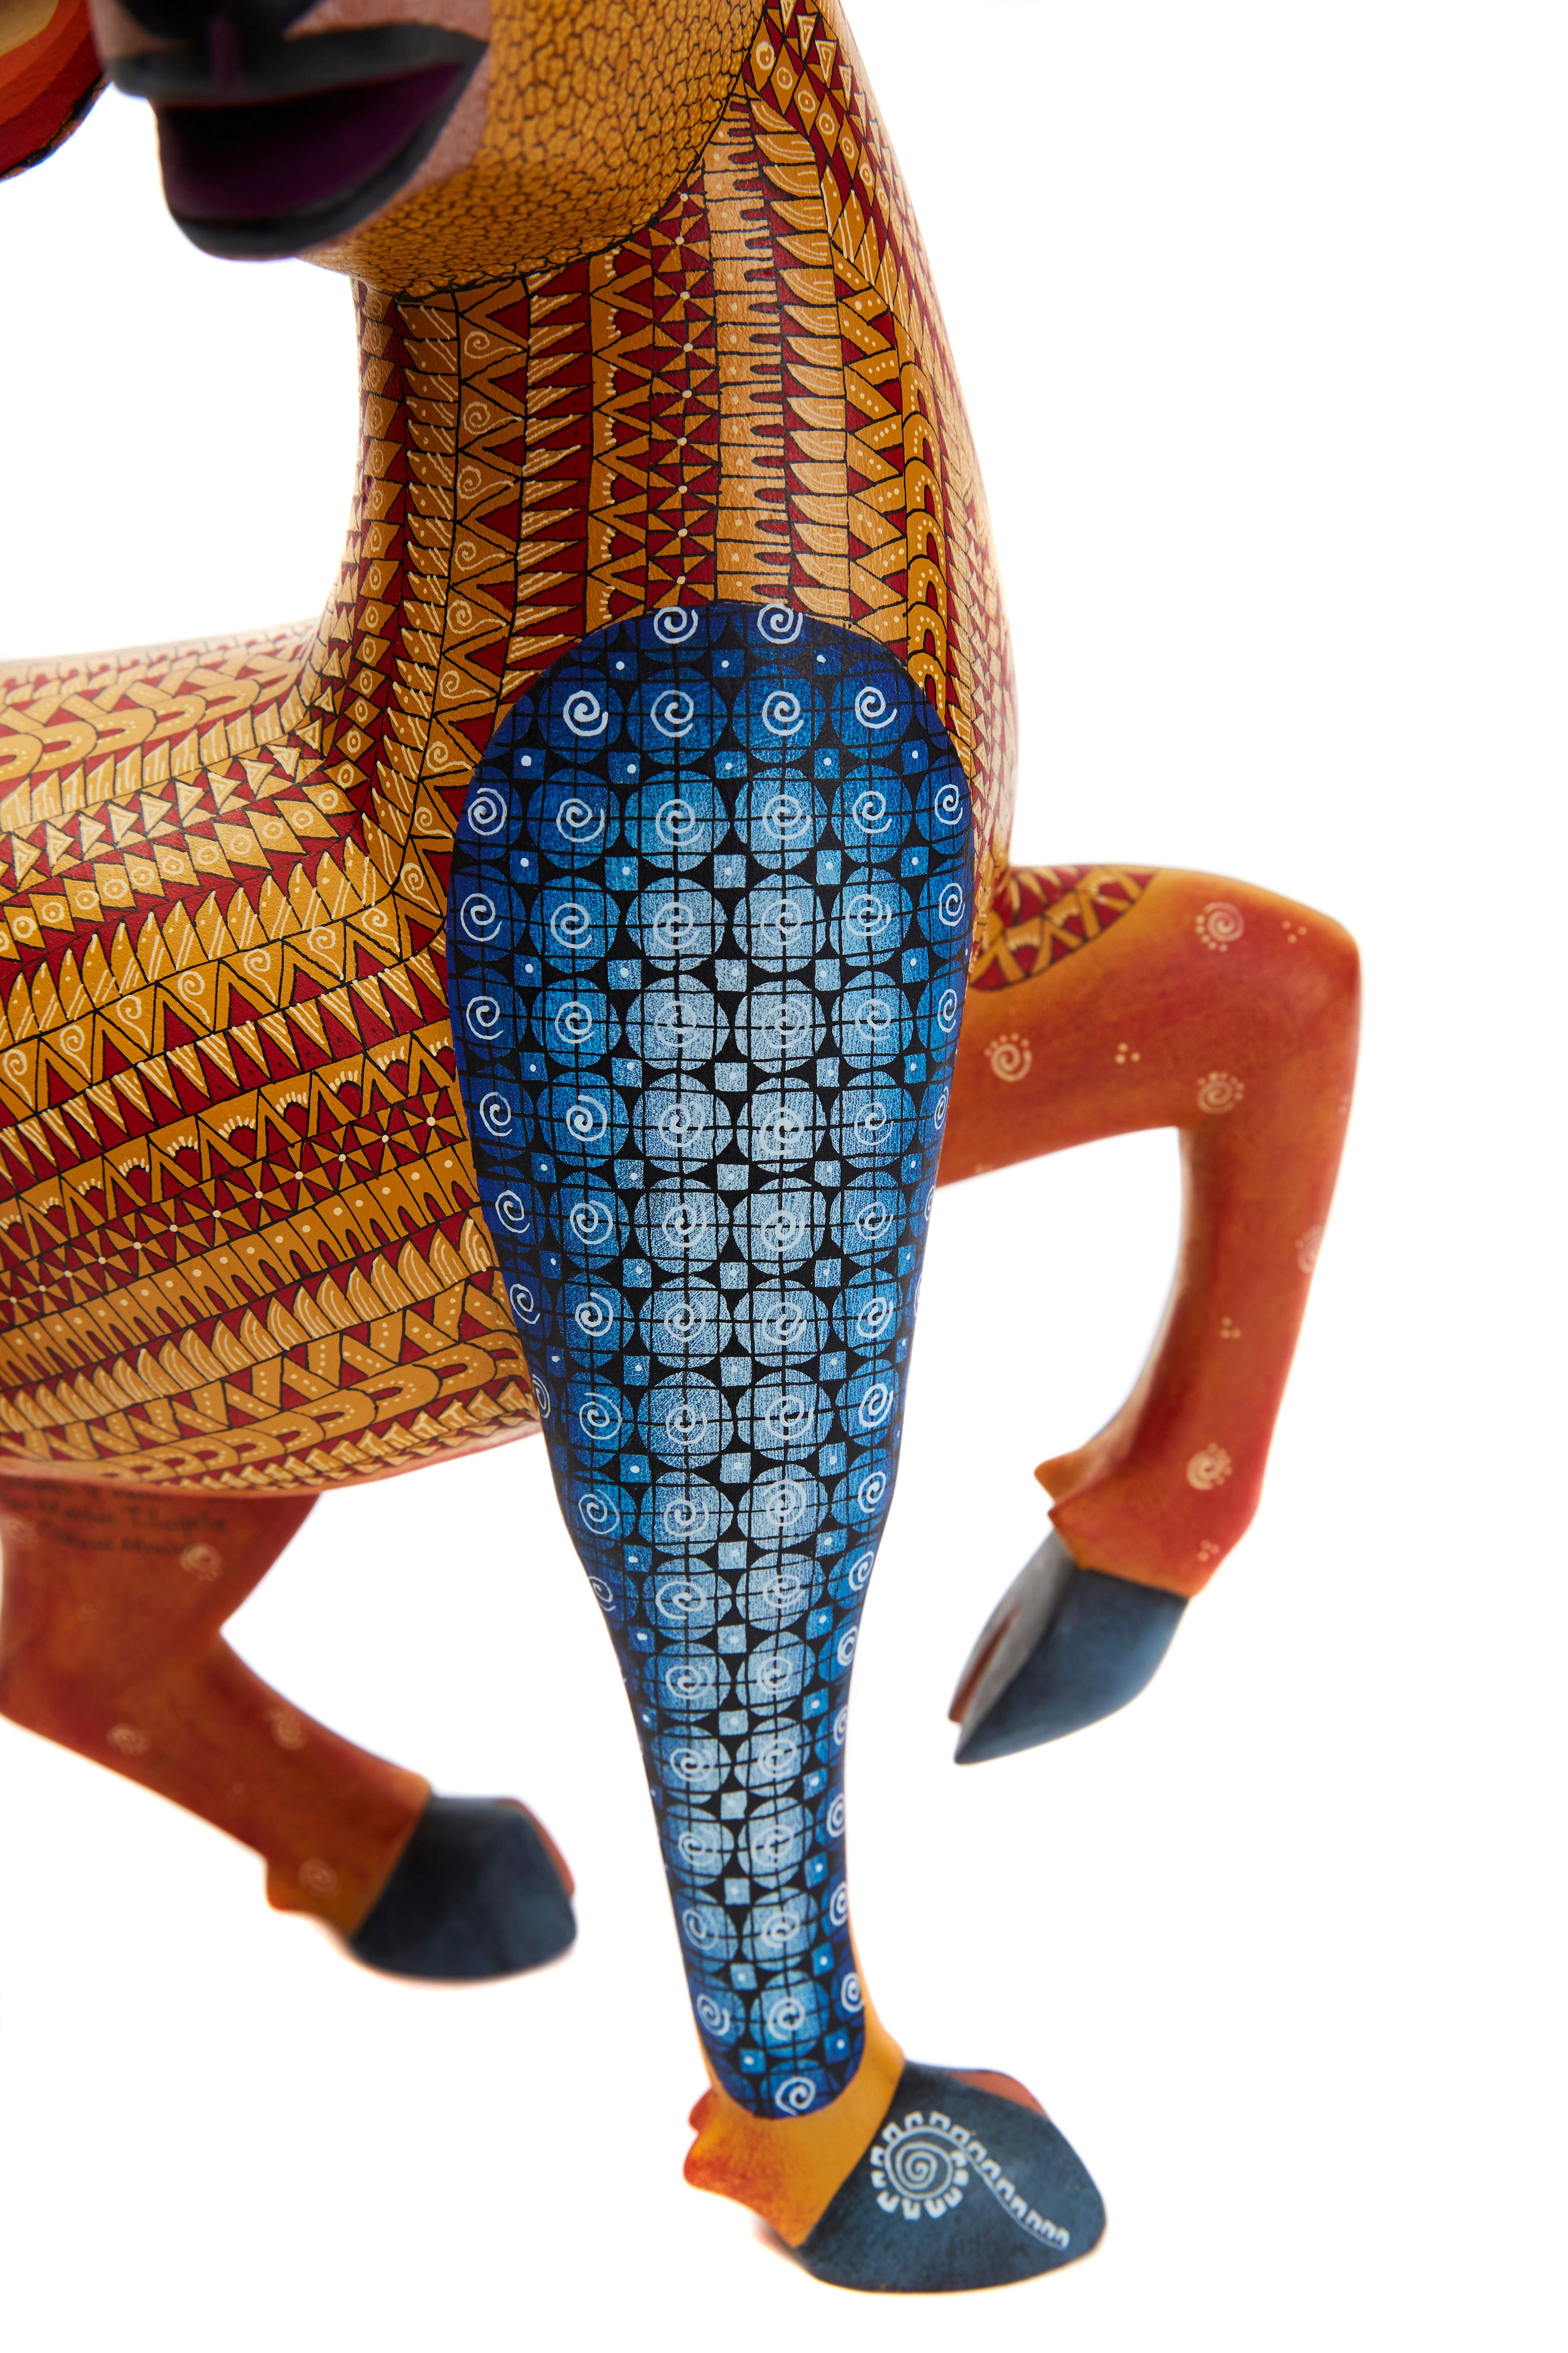 Venado Majestuoso -  Deer Alebrije
This Mexican Deer Alebrije made with Copal wood, wood carving technique gouges, machete and sandpaper, decorated with acrylic paintings with Zapotec symbols.
At Cactus Fine Art, we offer an exclusive selection of